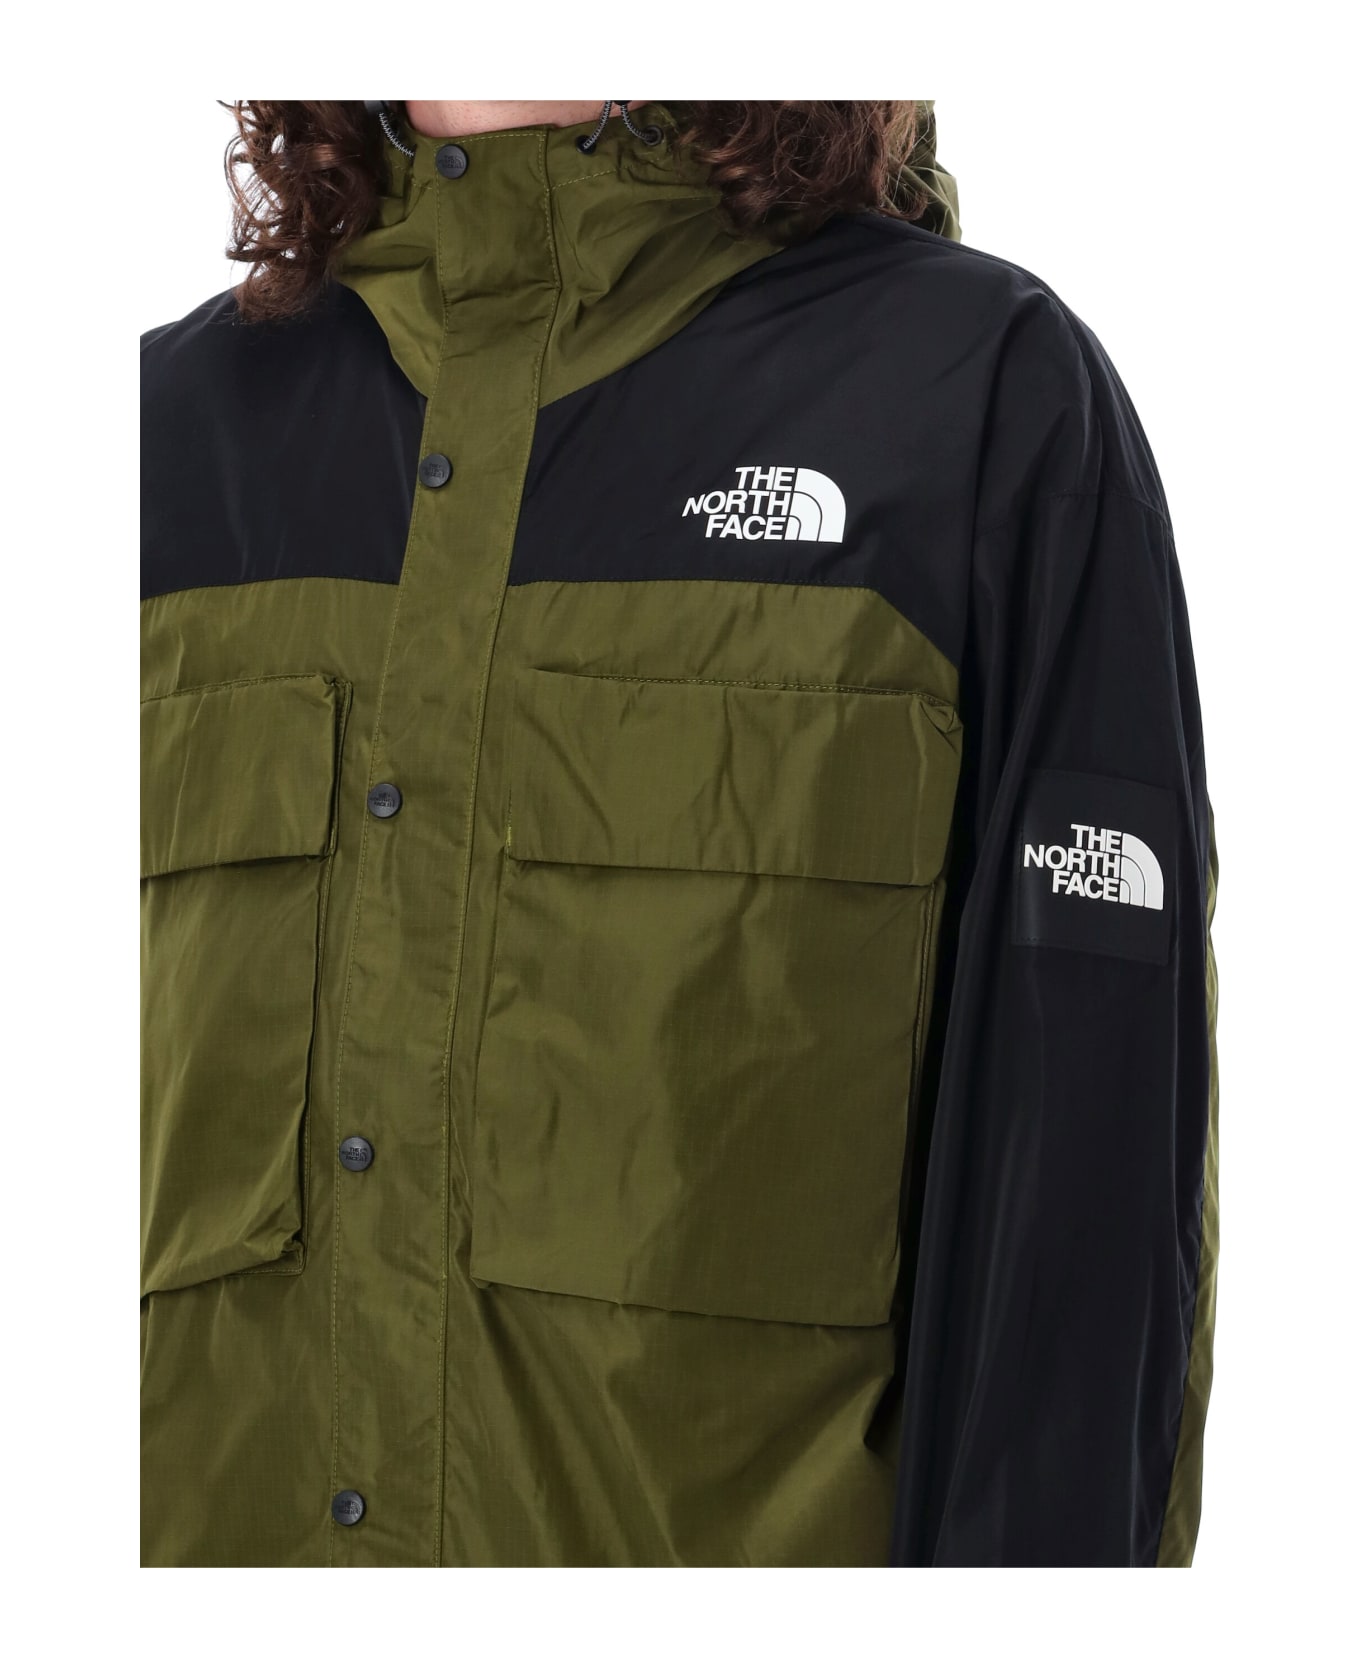 The North Face Tustin Cargo Pkt Jacket - OLIVE